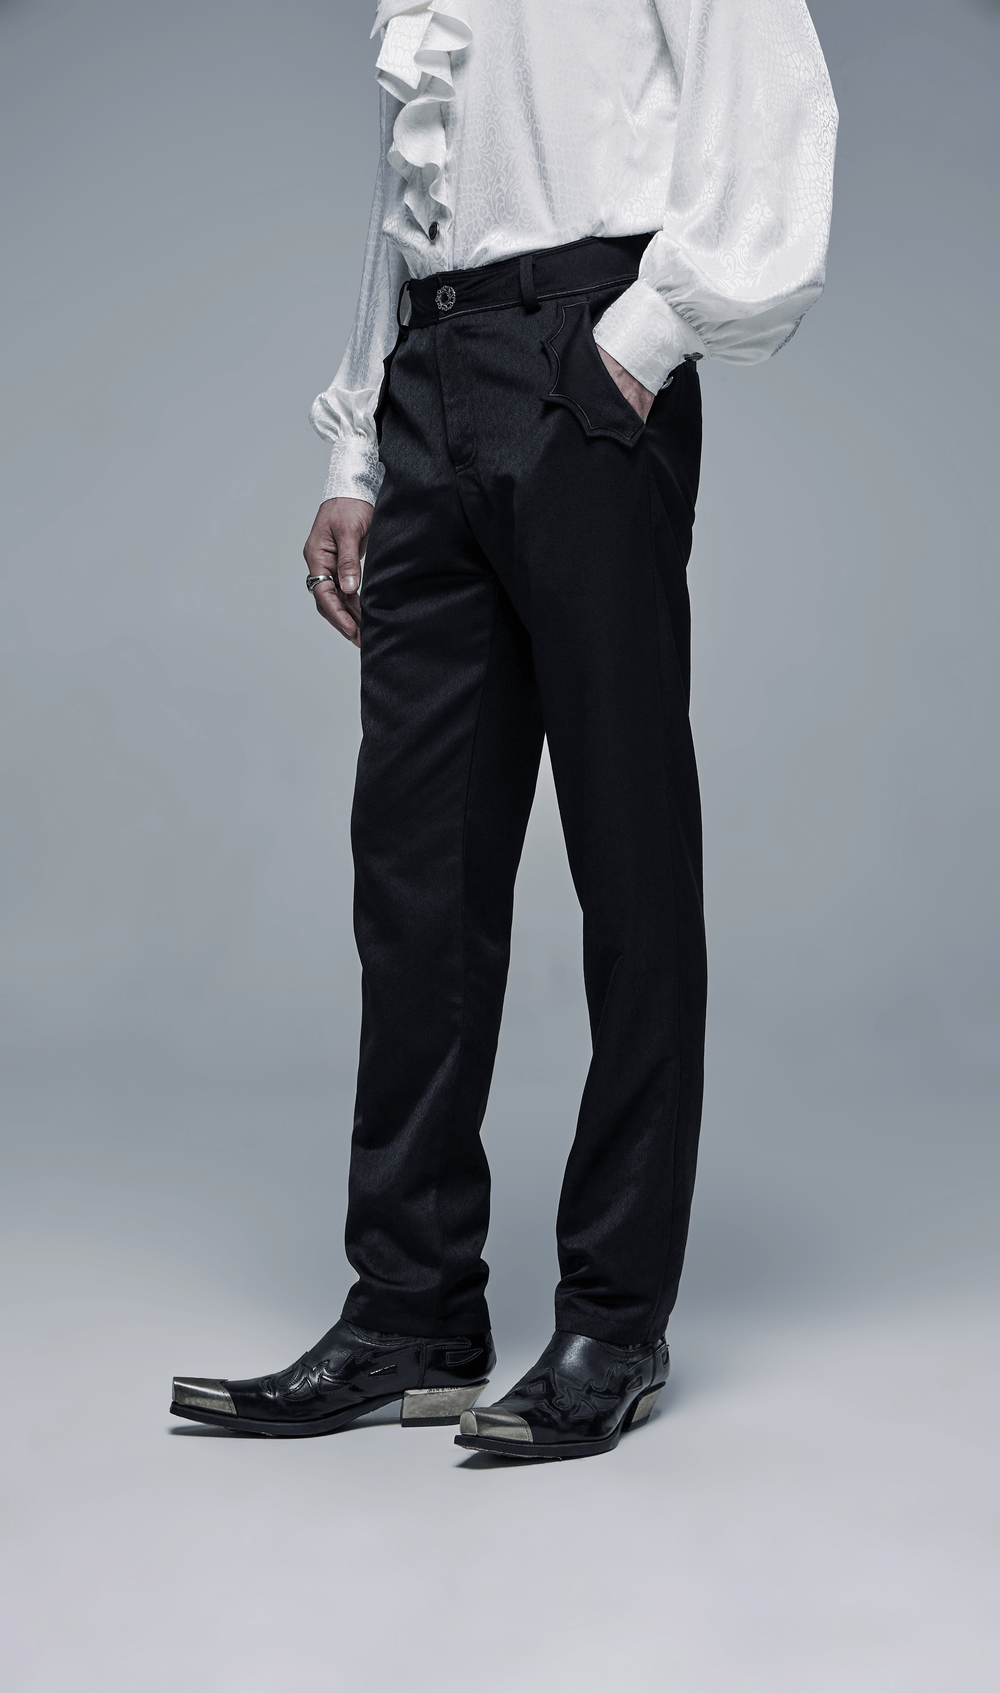 Men's Tailored Gothic Trousers with Bat Accents